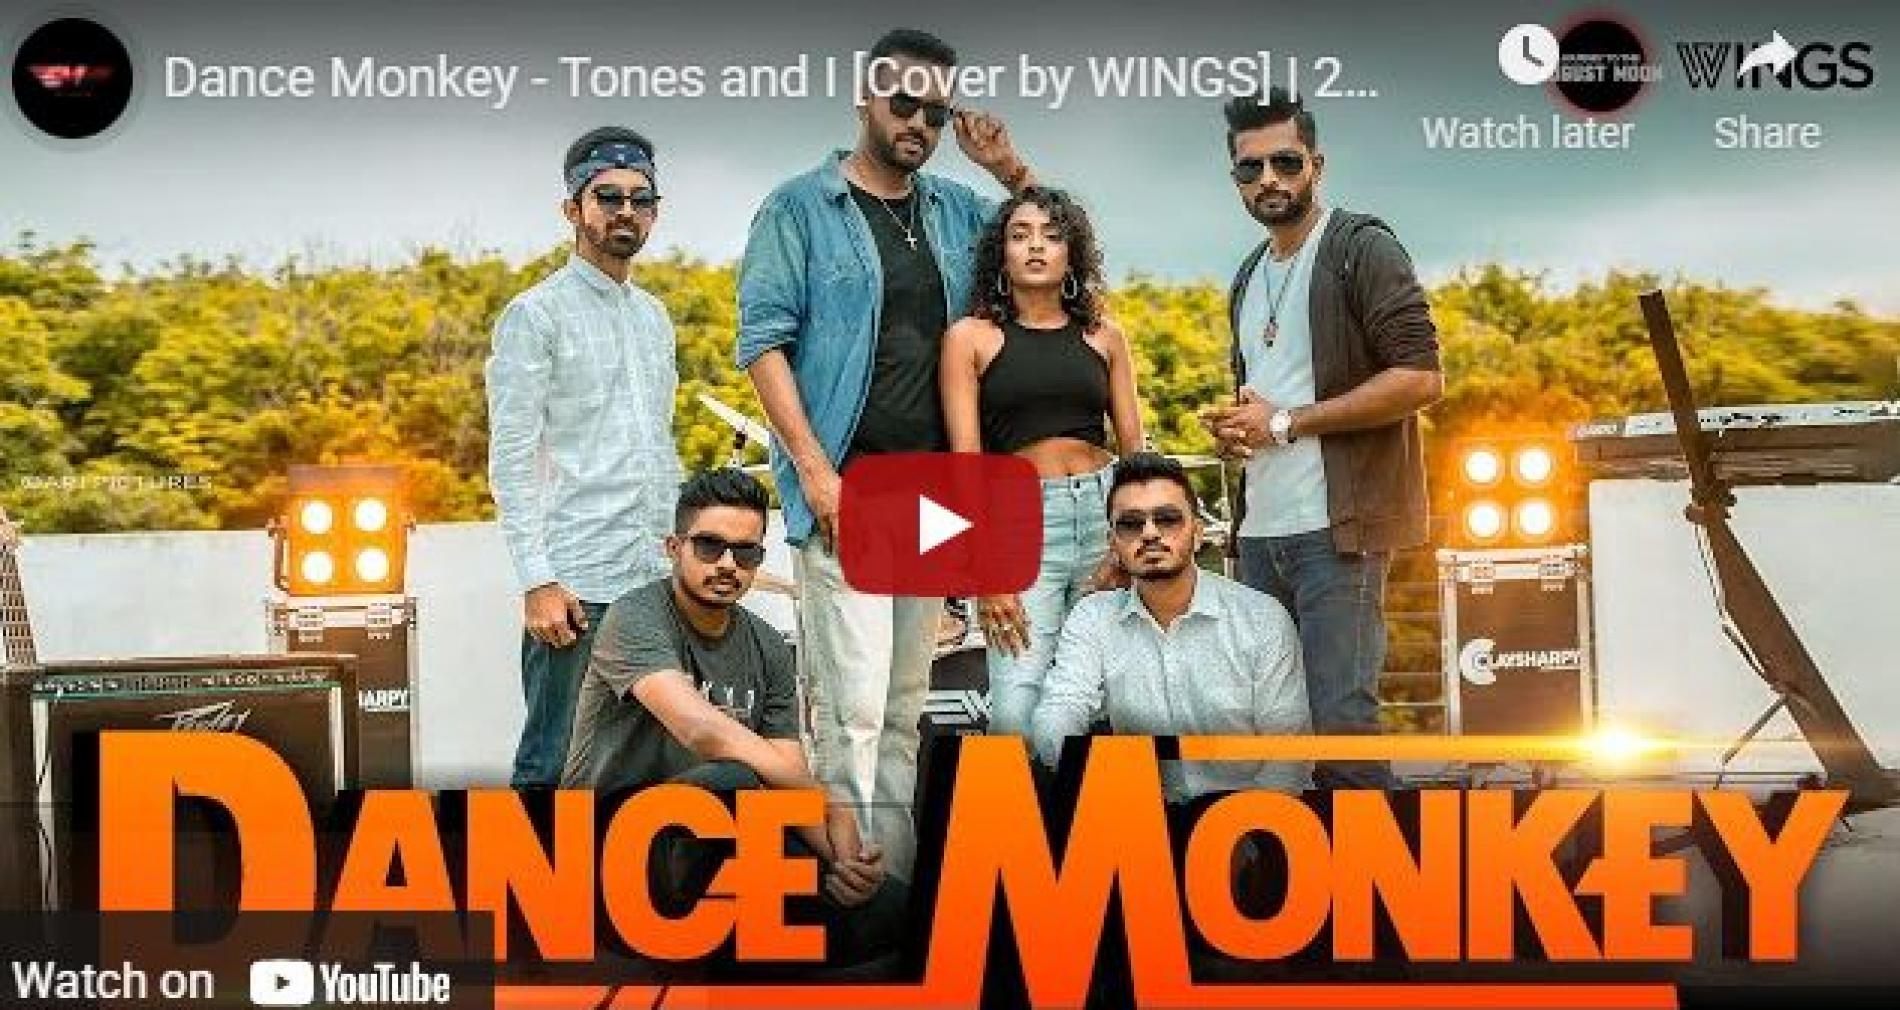 New Music : Dance Monkey – Tones and I [Cover by WINGS] | 2021